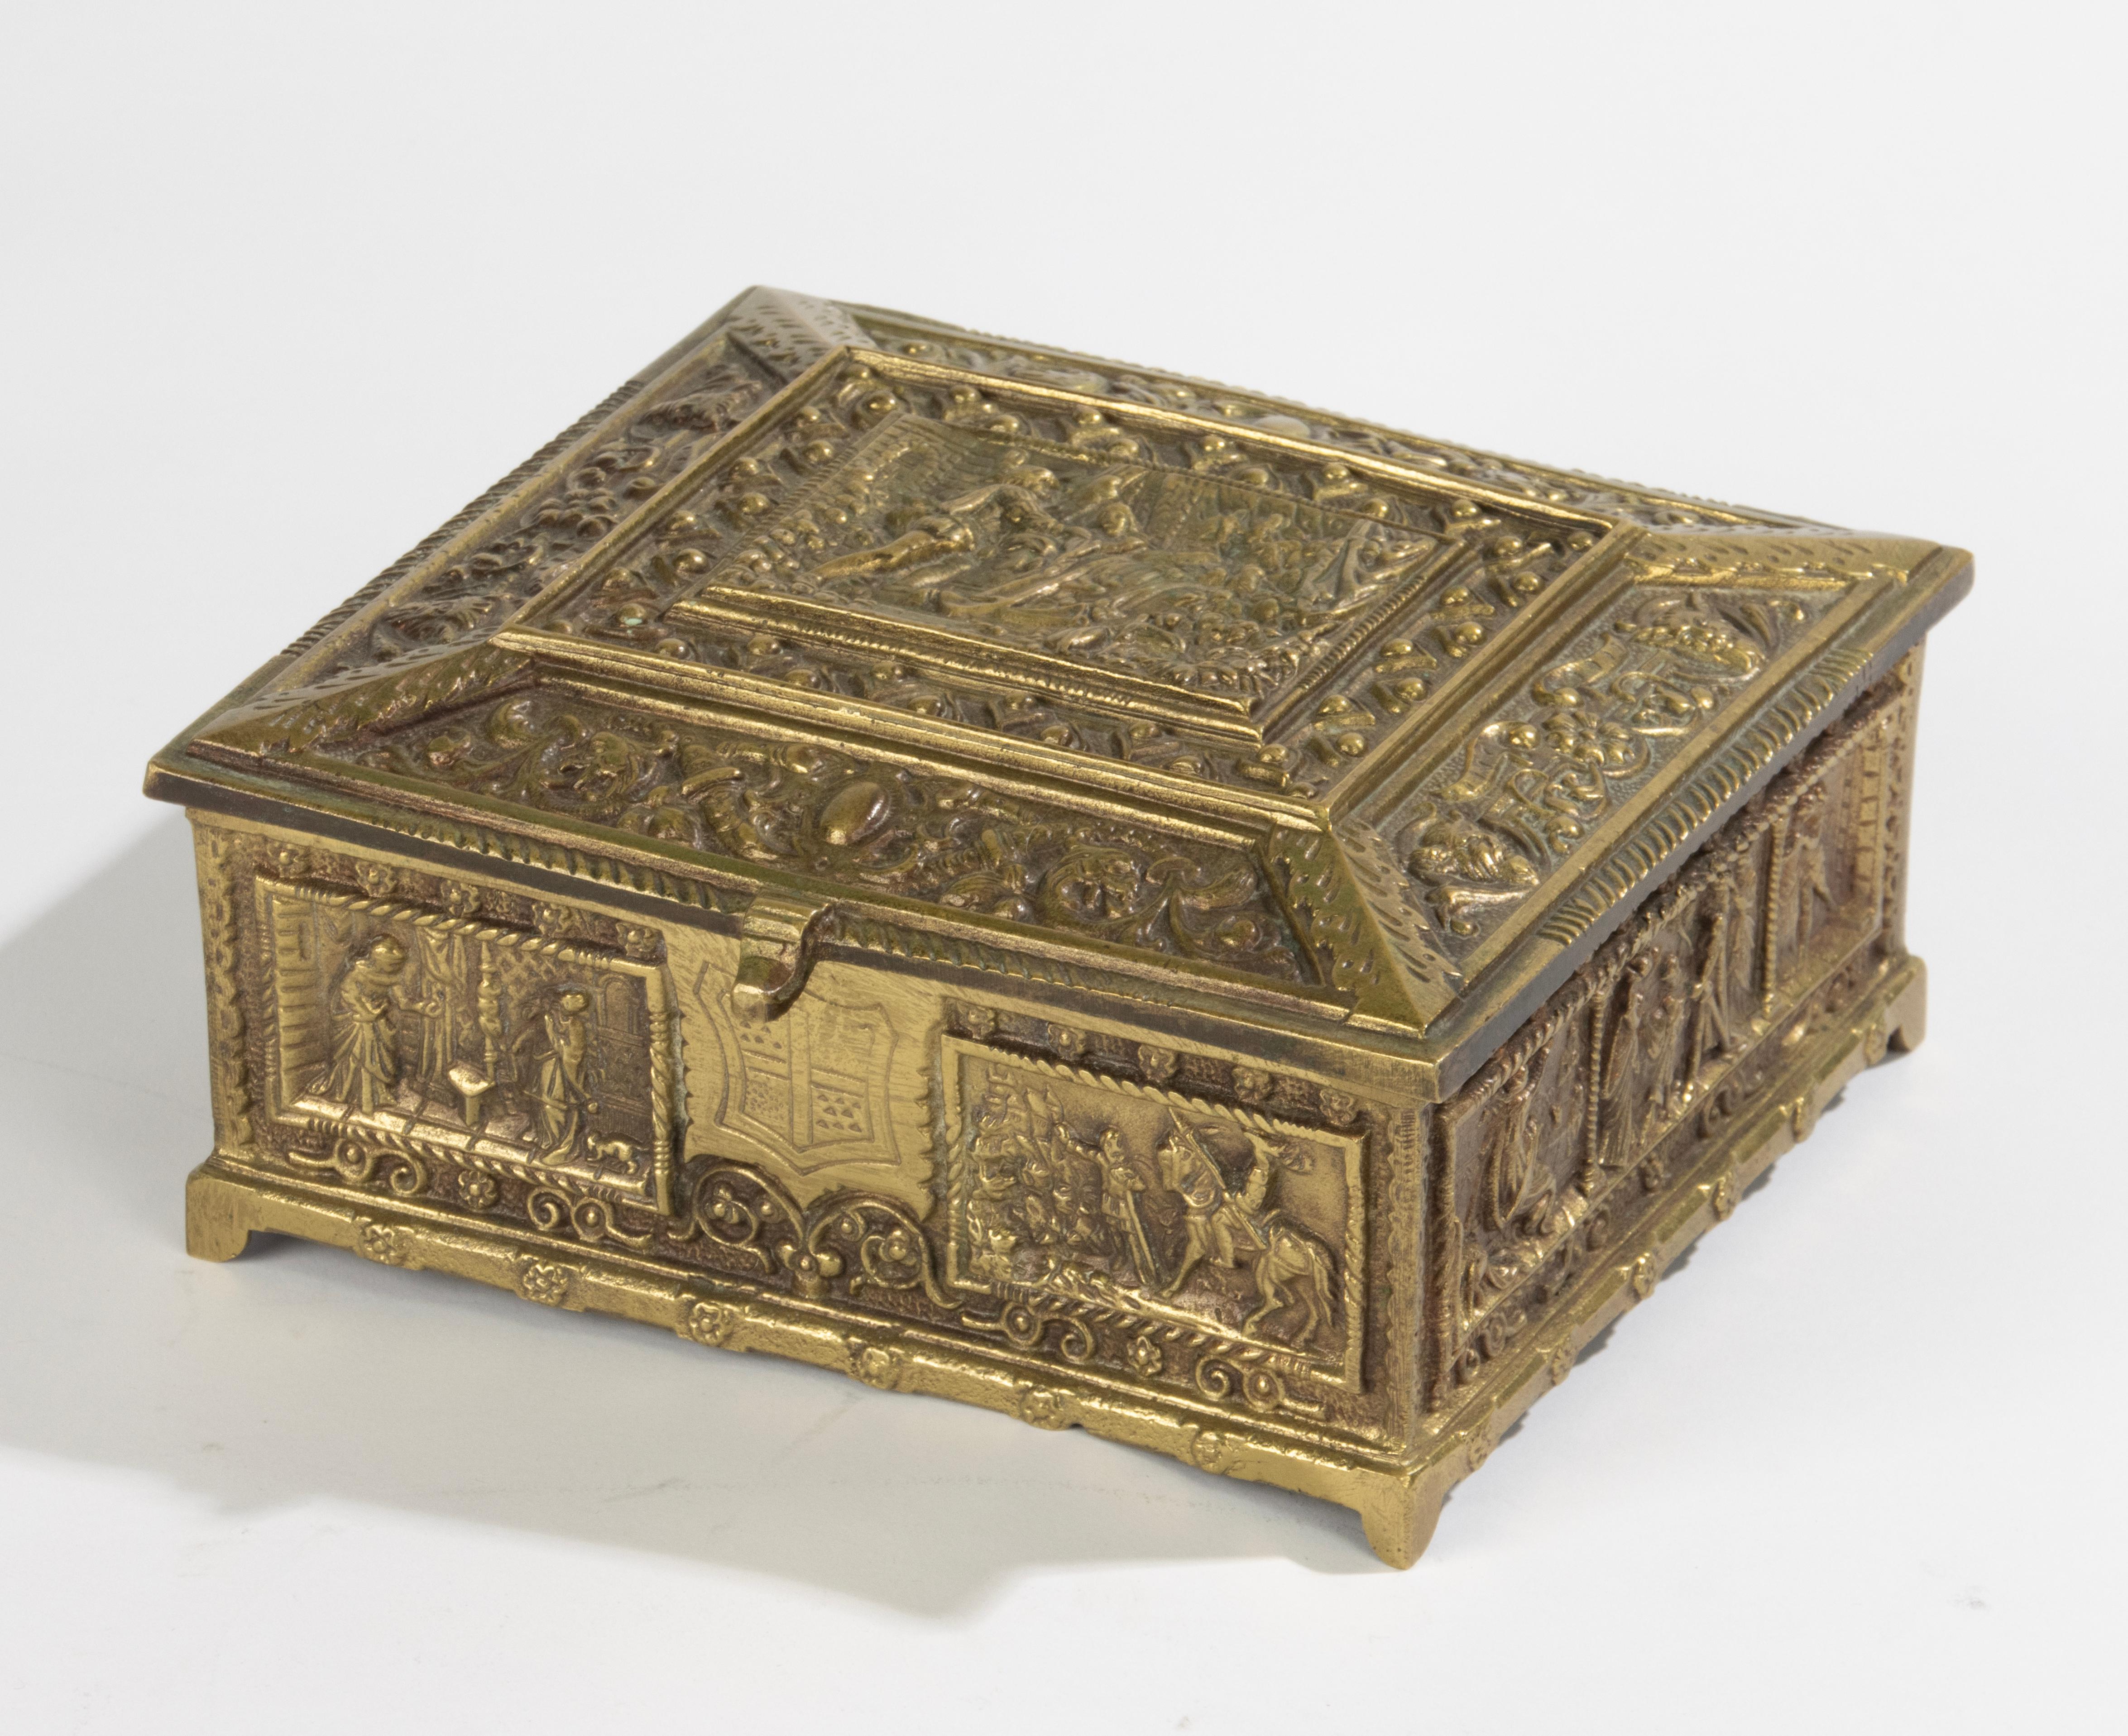 A nice antique bronze box, with beautiful Renaissance style scenes. The box is in good condition. Beautiful color and old patina.
Estimated age and origin: Belgium, circa 1910.
Dimensions: 17.5 x 16 cm and 8 cm high.
Free shipping worldwide